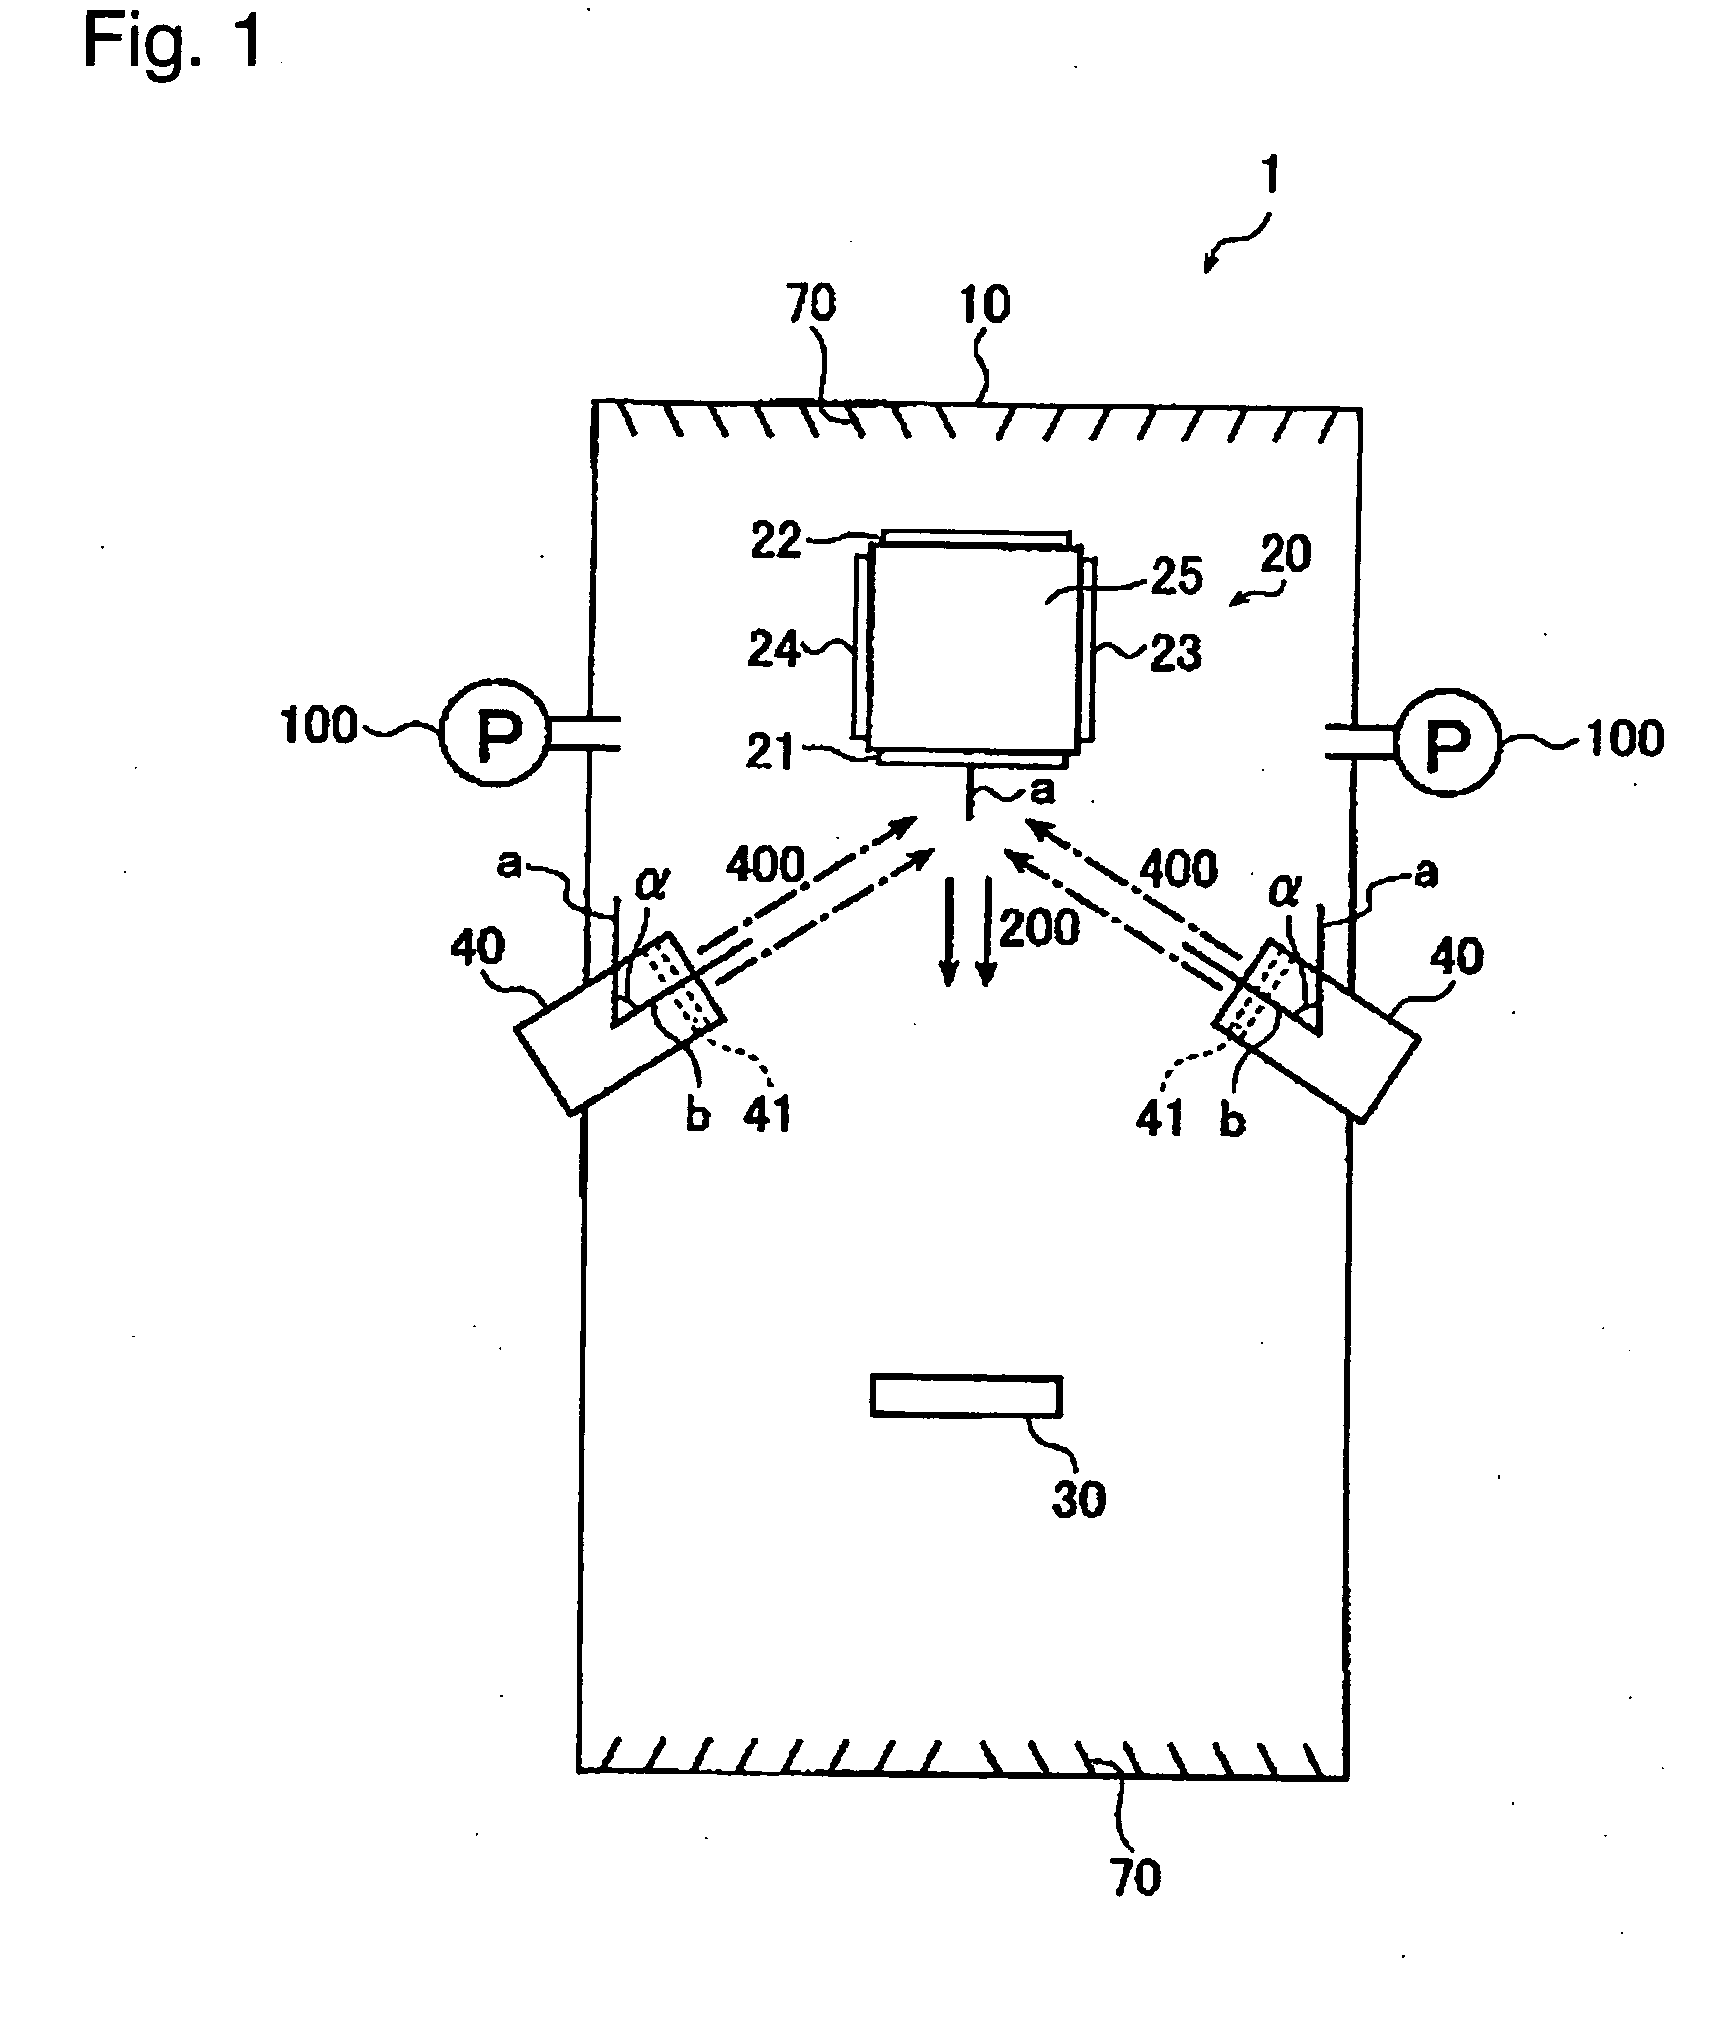 Ion beam sputtering apparatus and film deposition method for a multilayer for a reflective-type mask blank for EUV lithography